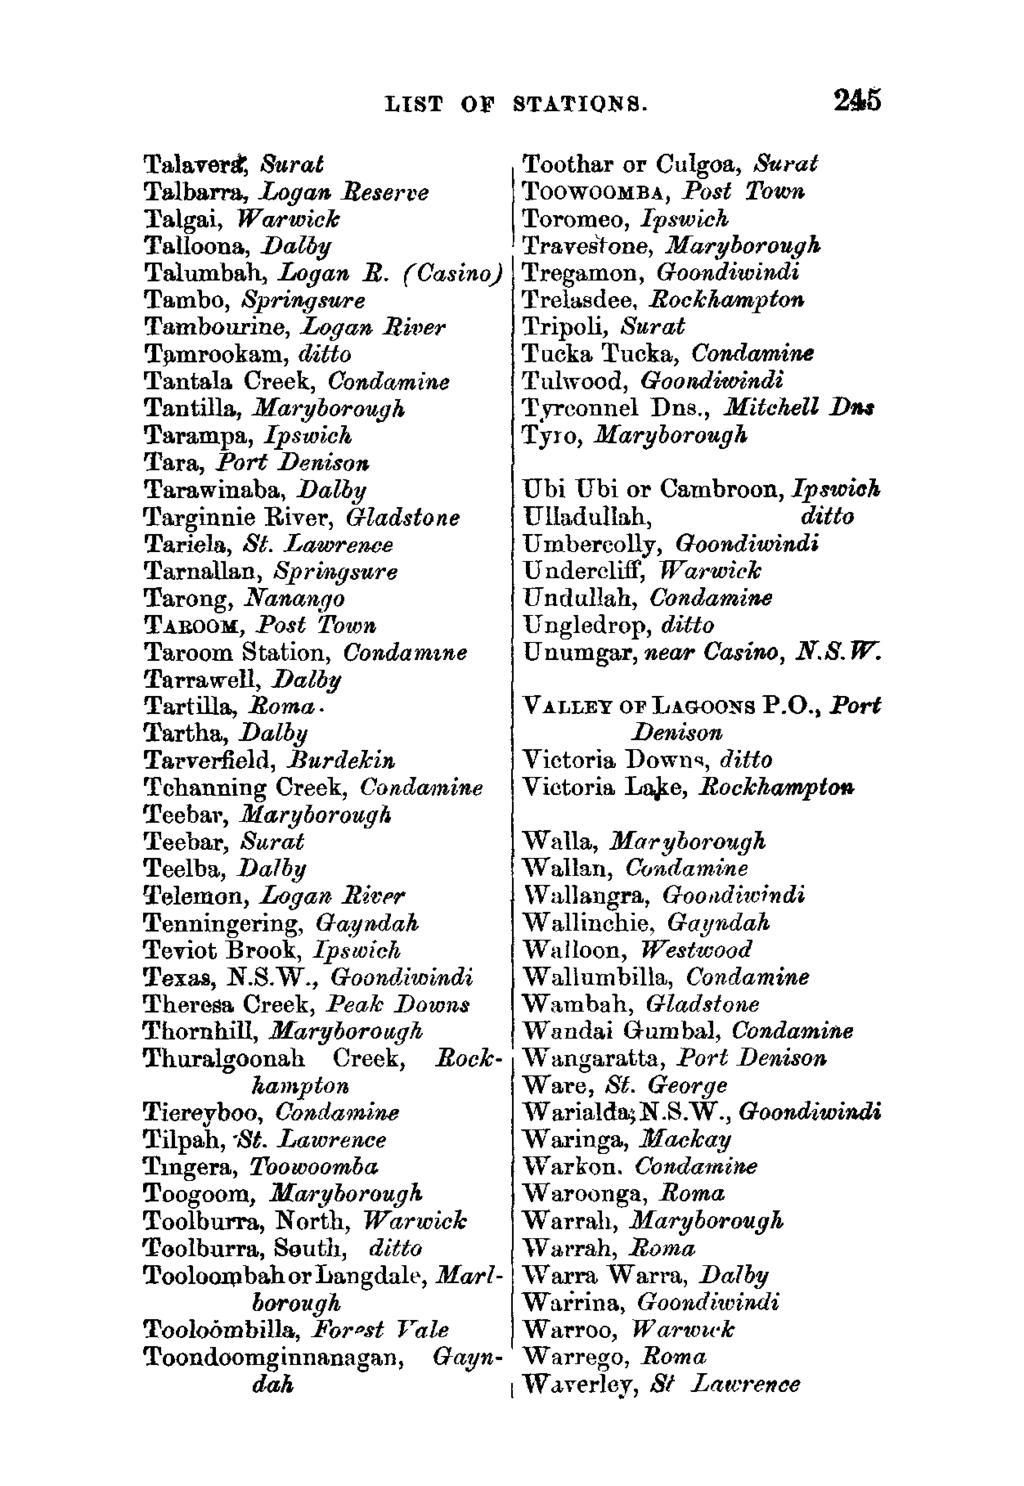 LIST OF STATIONS.